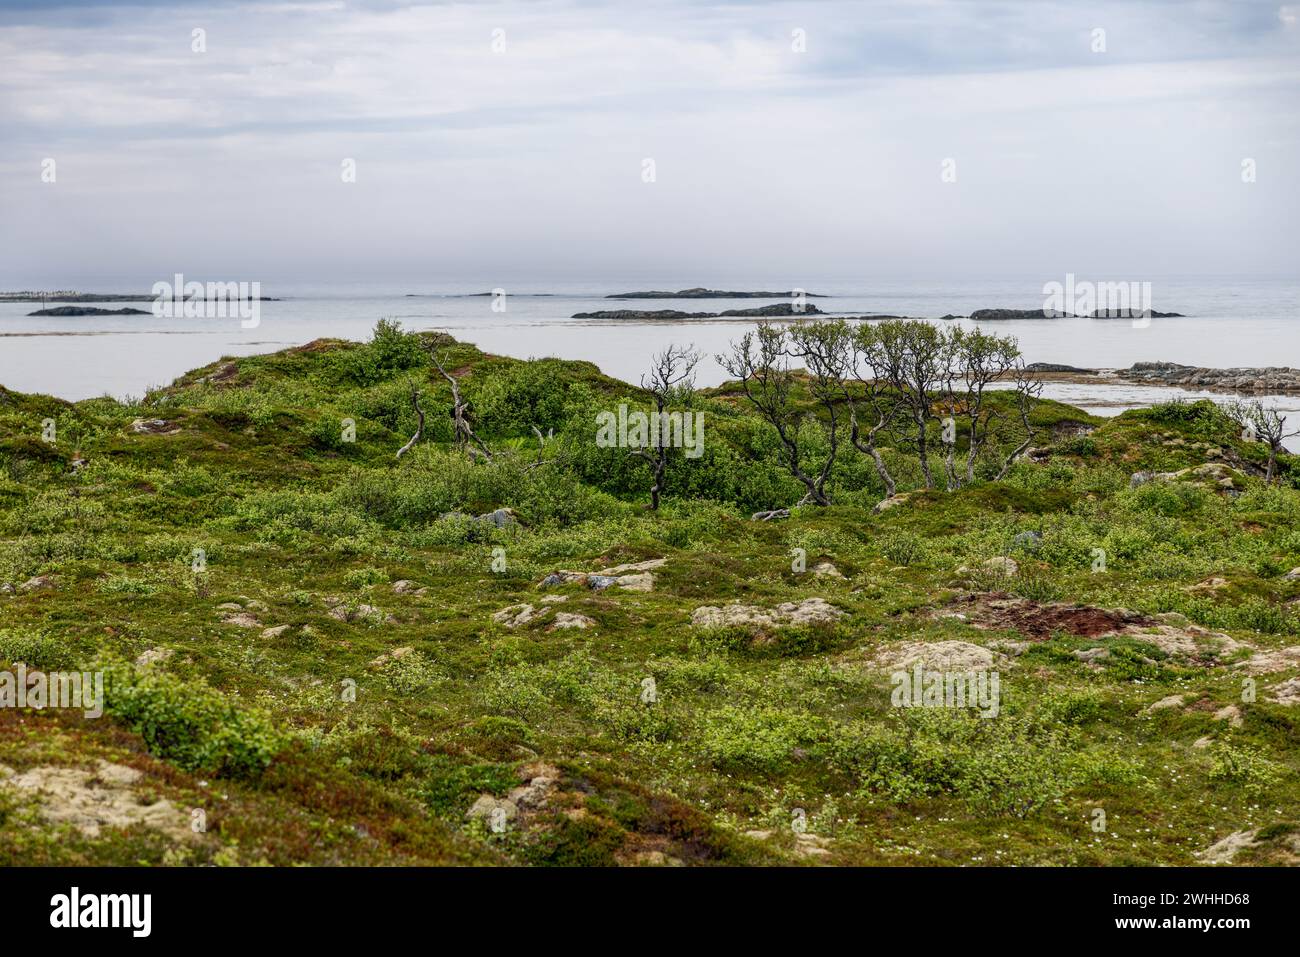 A serene tundra landscape on the Norwegian coast, with sparse trees and moss-covered rocks overlooking the calm Arctic waters Stock Photo